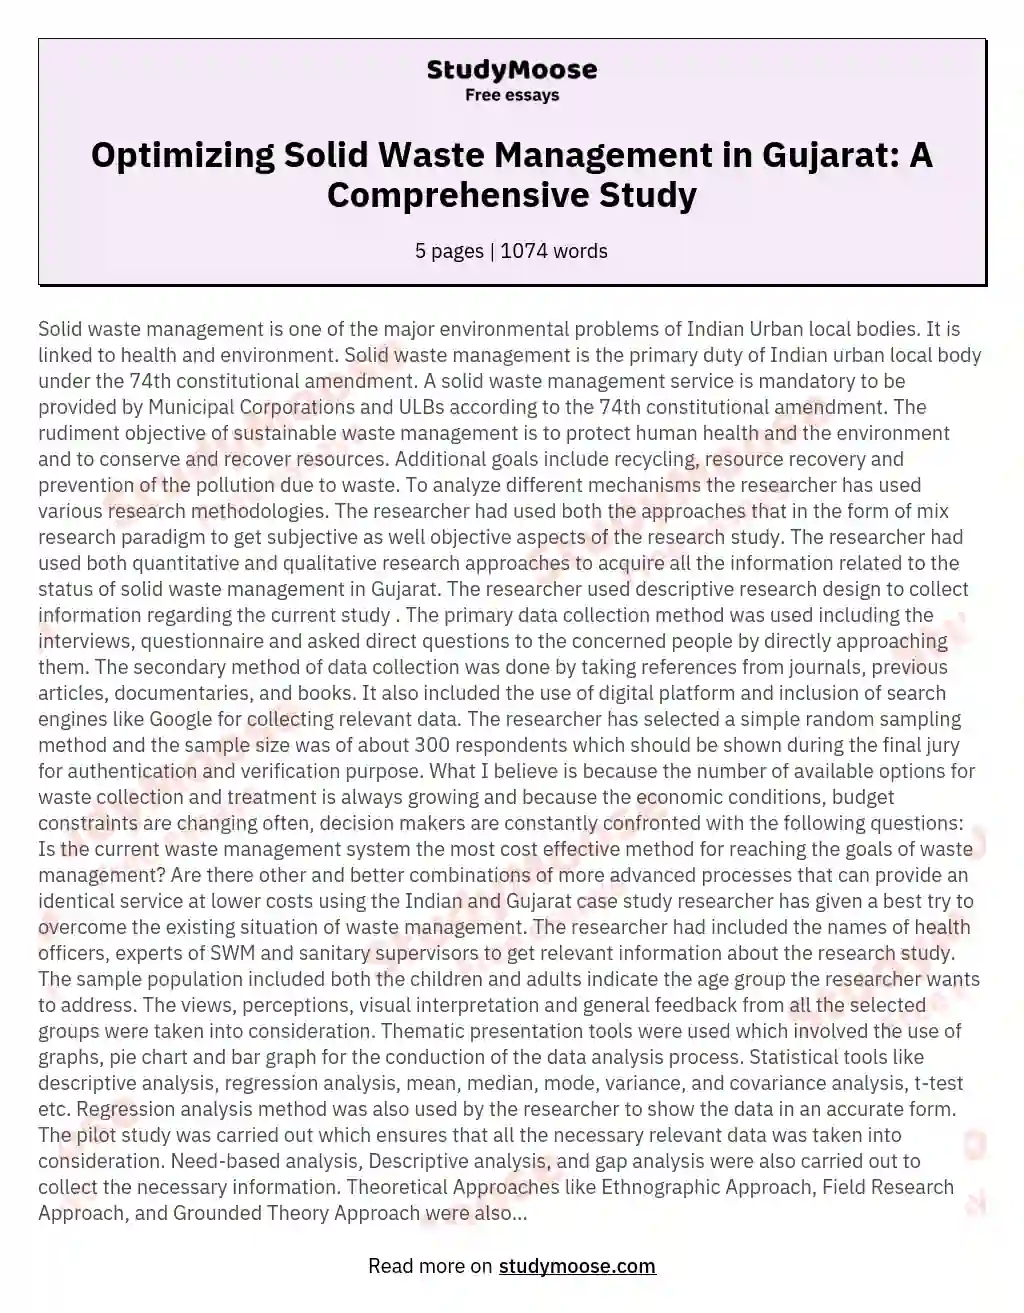 Optimizing Solid Waste Management in Gujarat: A Comprehensive Study essay